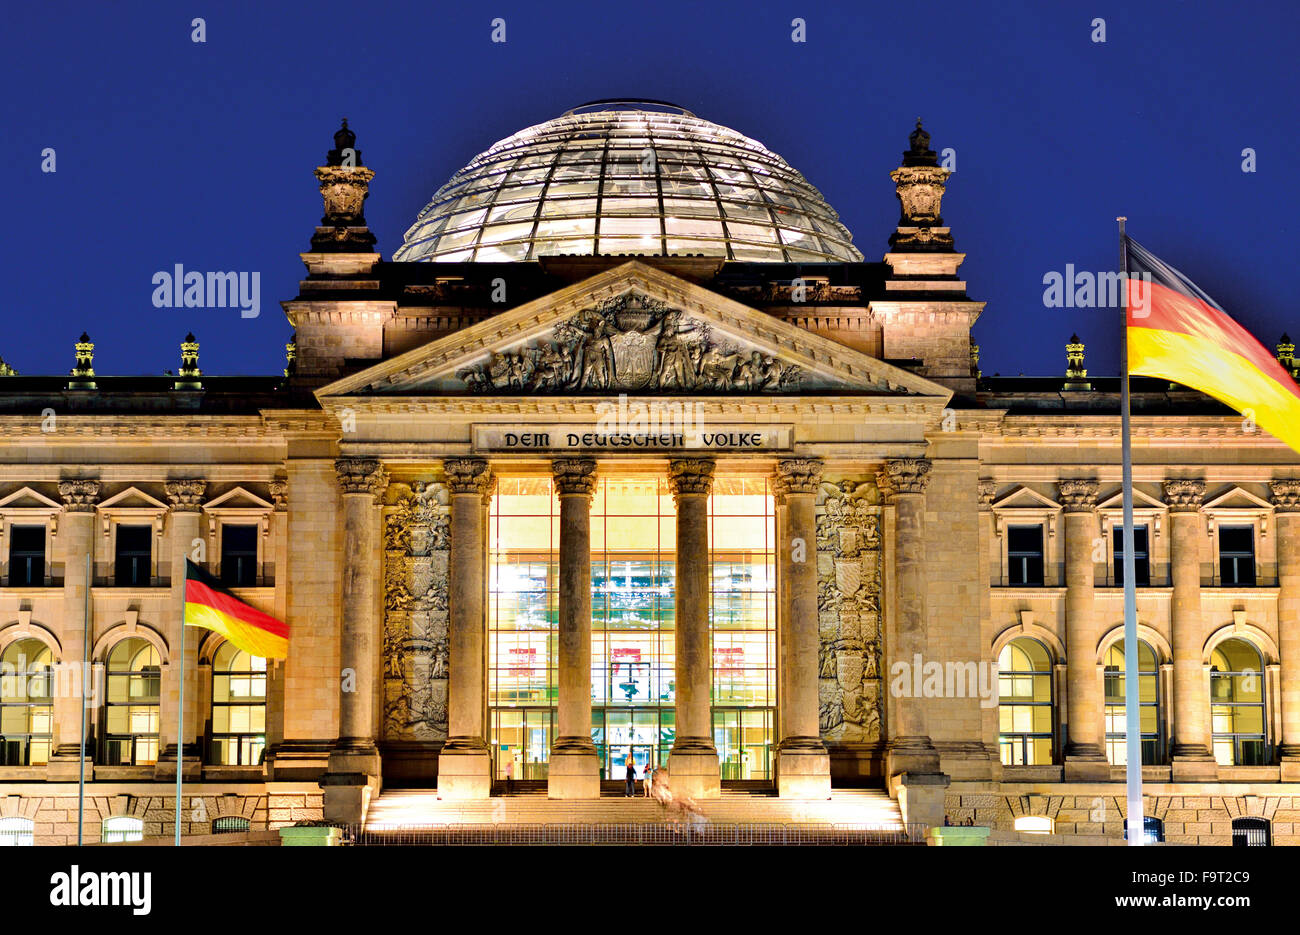 Germany, Berlin: Nocturnal illuminated front facade of the German House of Parliament 'Deutscher Reichstag' Stock Photo